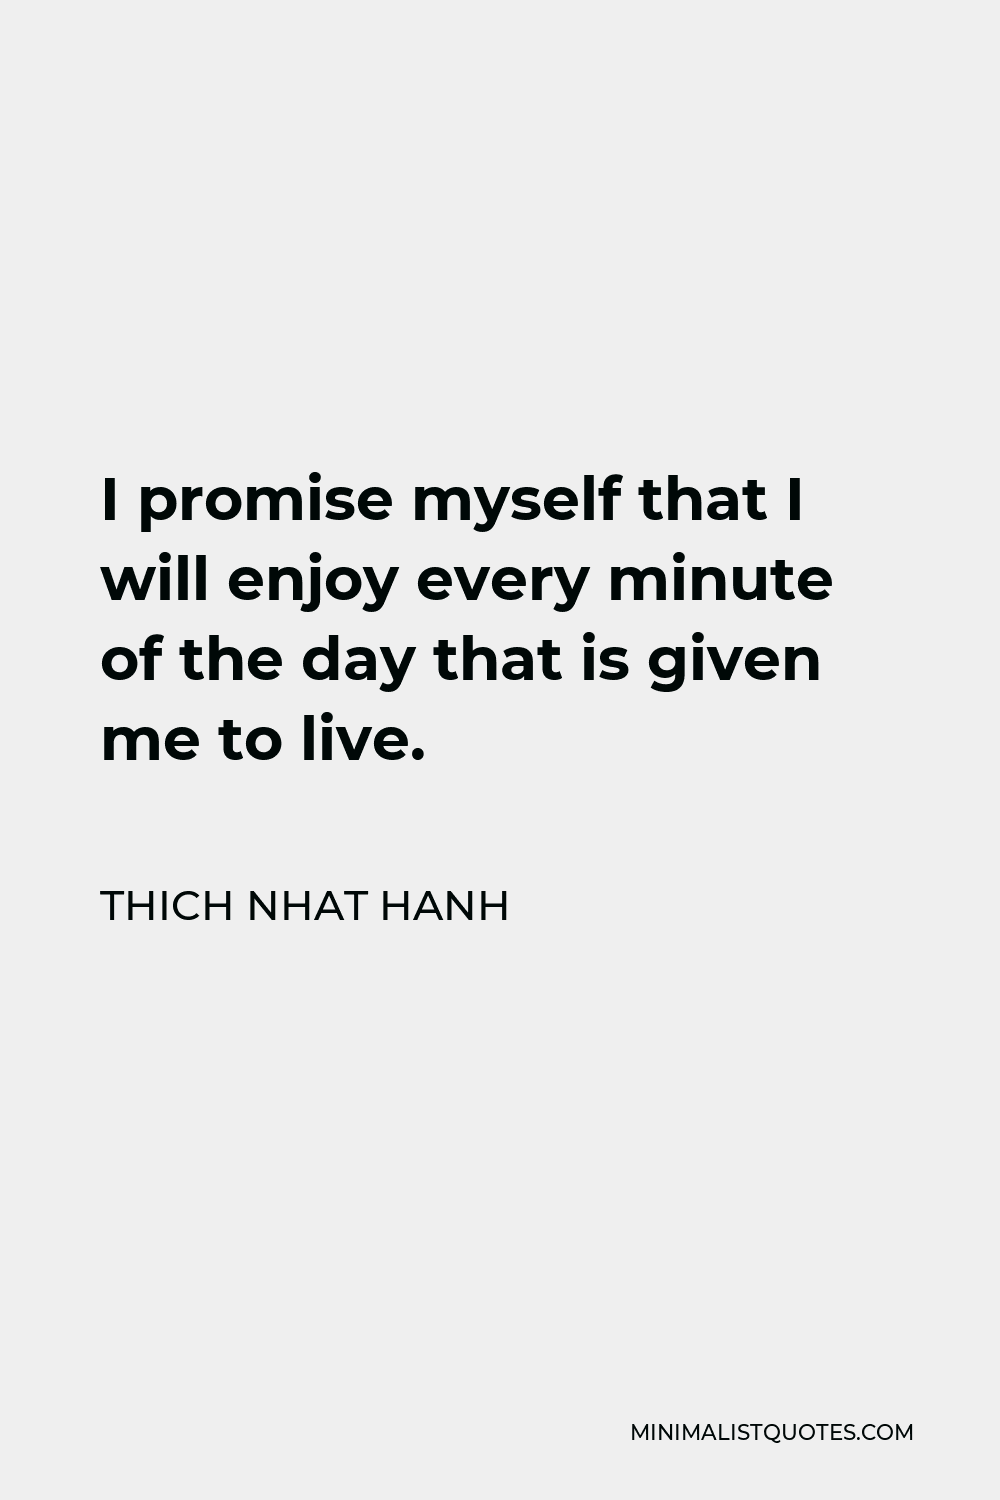 Thich Nhat Hanh Quote - I promise myself that I will enjoy every minute of the day that is given me to live.